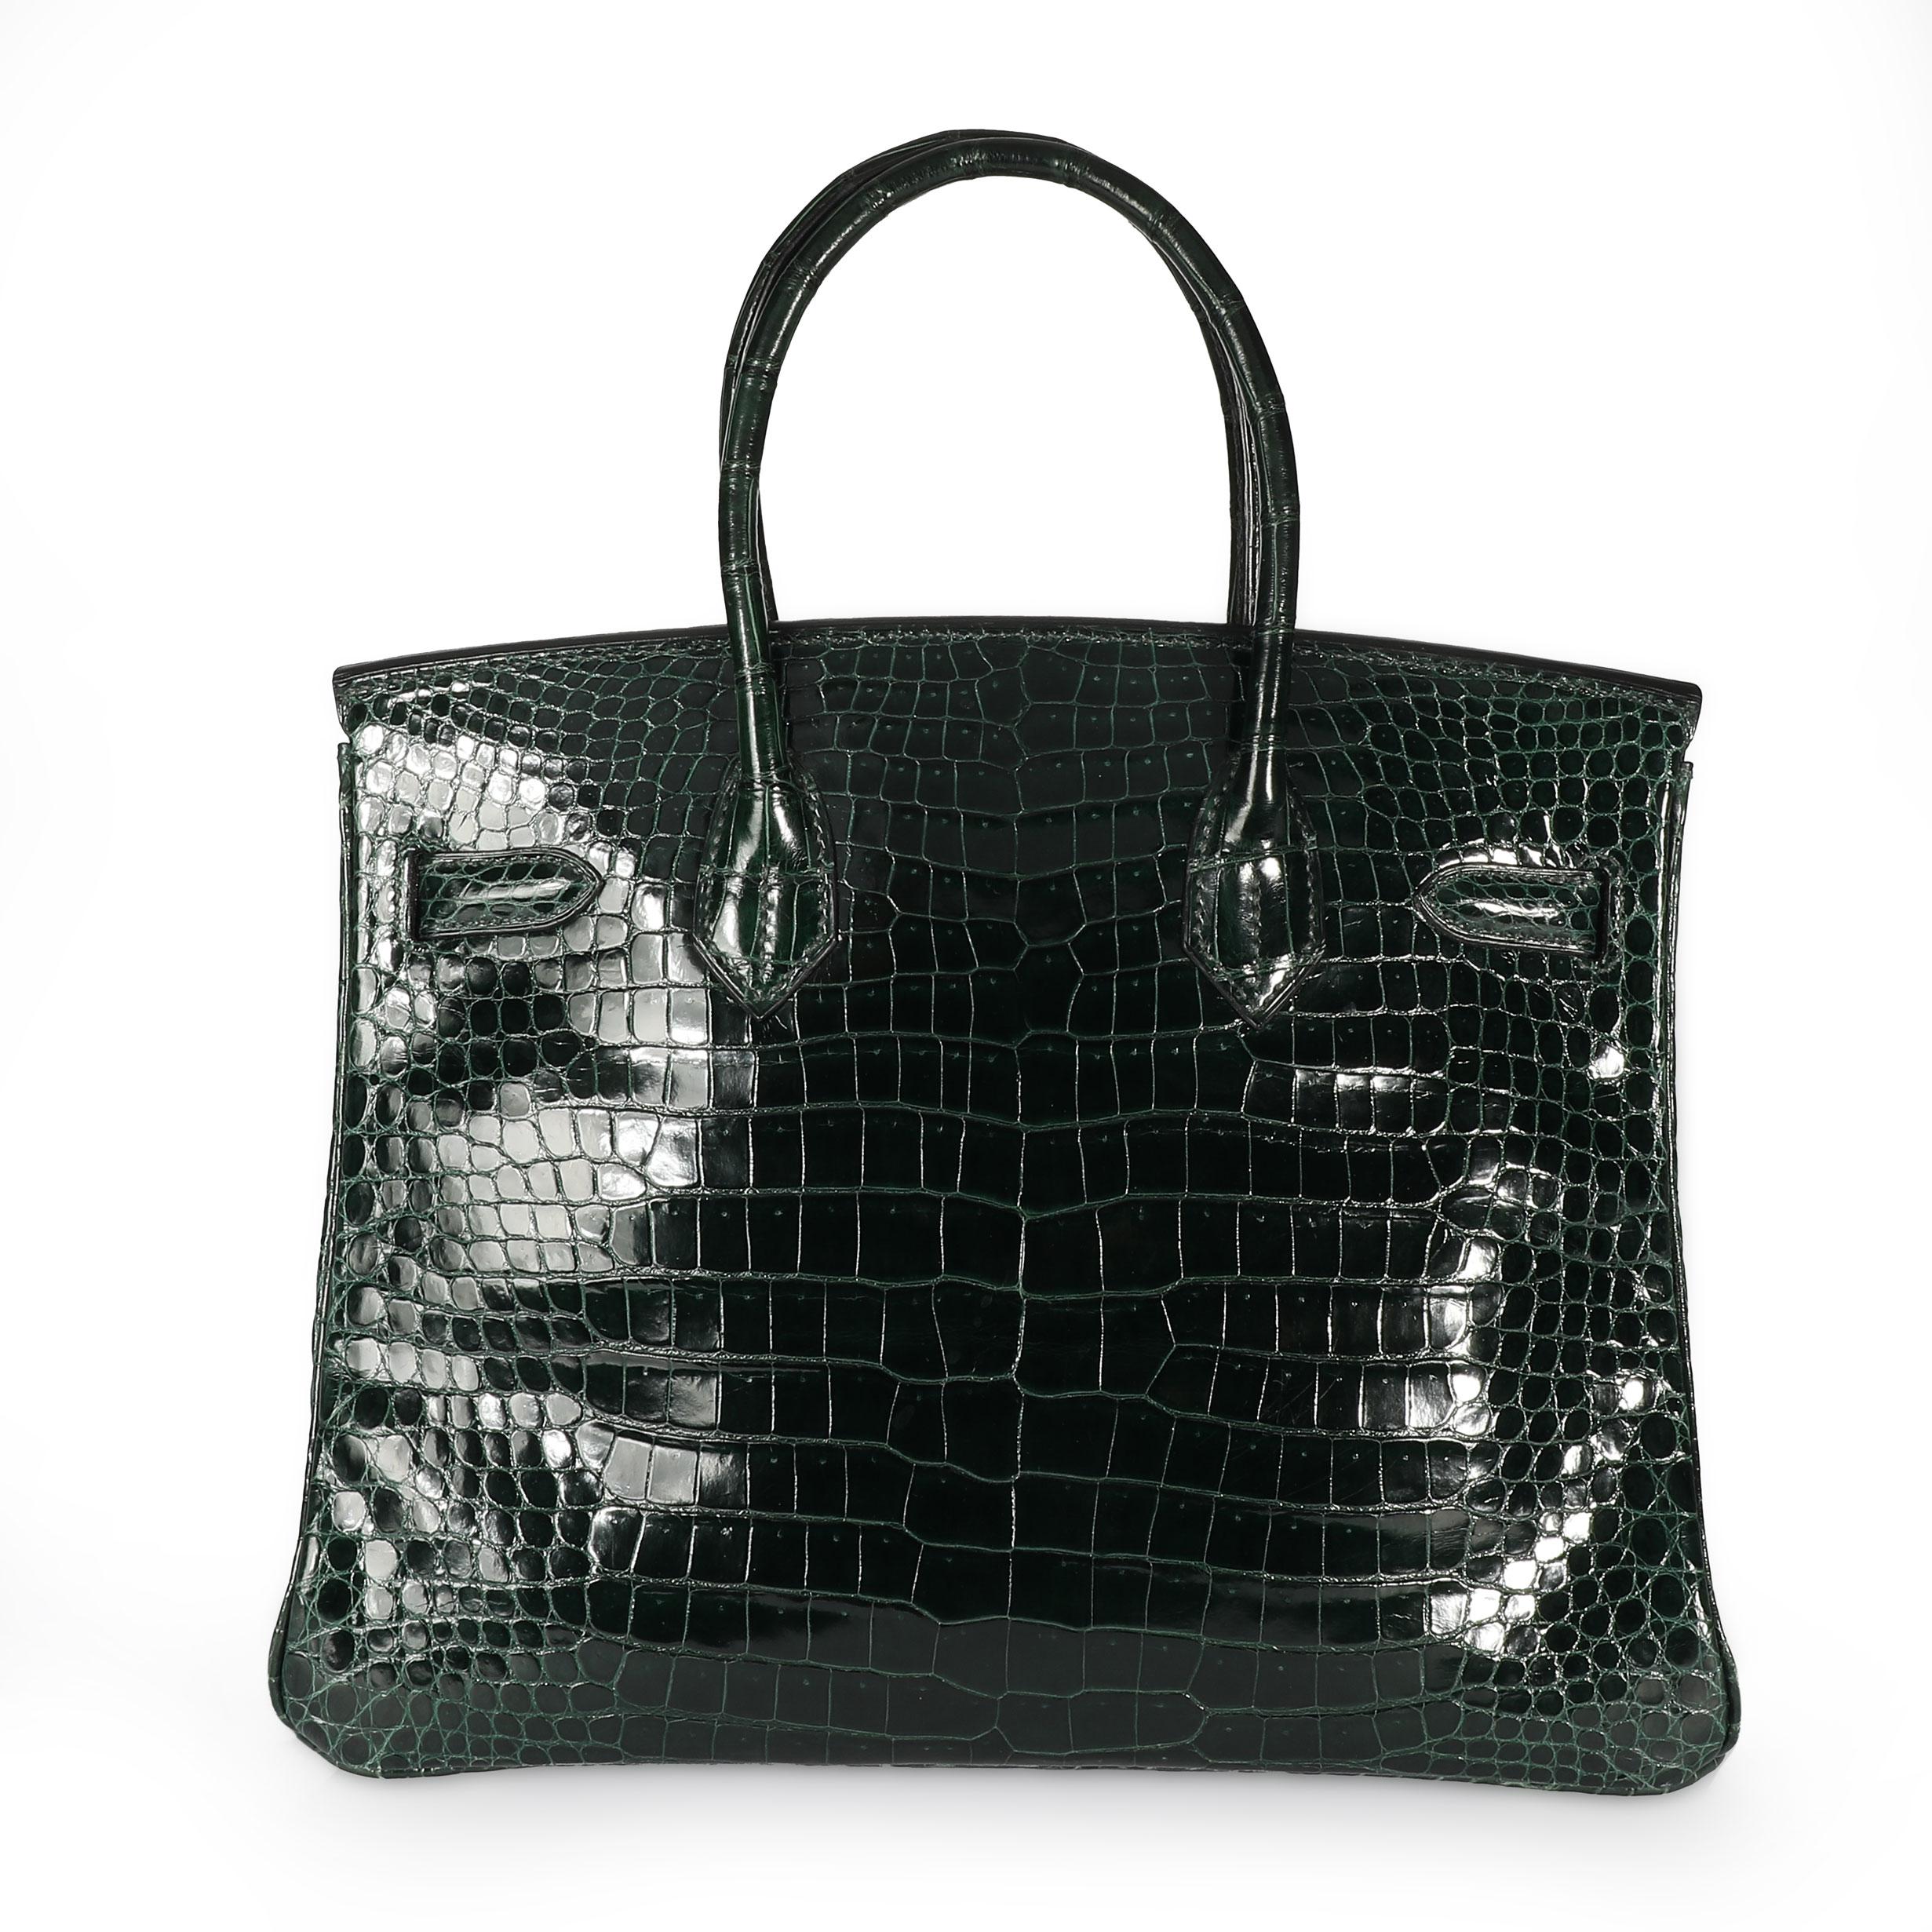 Hermès Shiny Vert Fonce Porosus Crocodile Birkin 30 PHW
SKU: 108516

The holy grail of handbags: the Hermès Birkin. First introduced in 1984, the Birkin is crafted entirely by hand over the course of 18 hours. Highly covetable and collectible, this